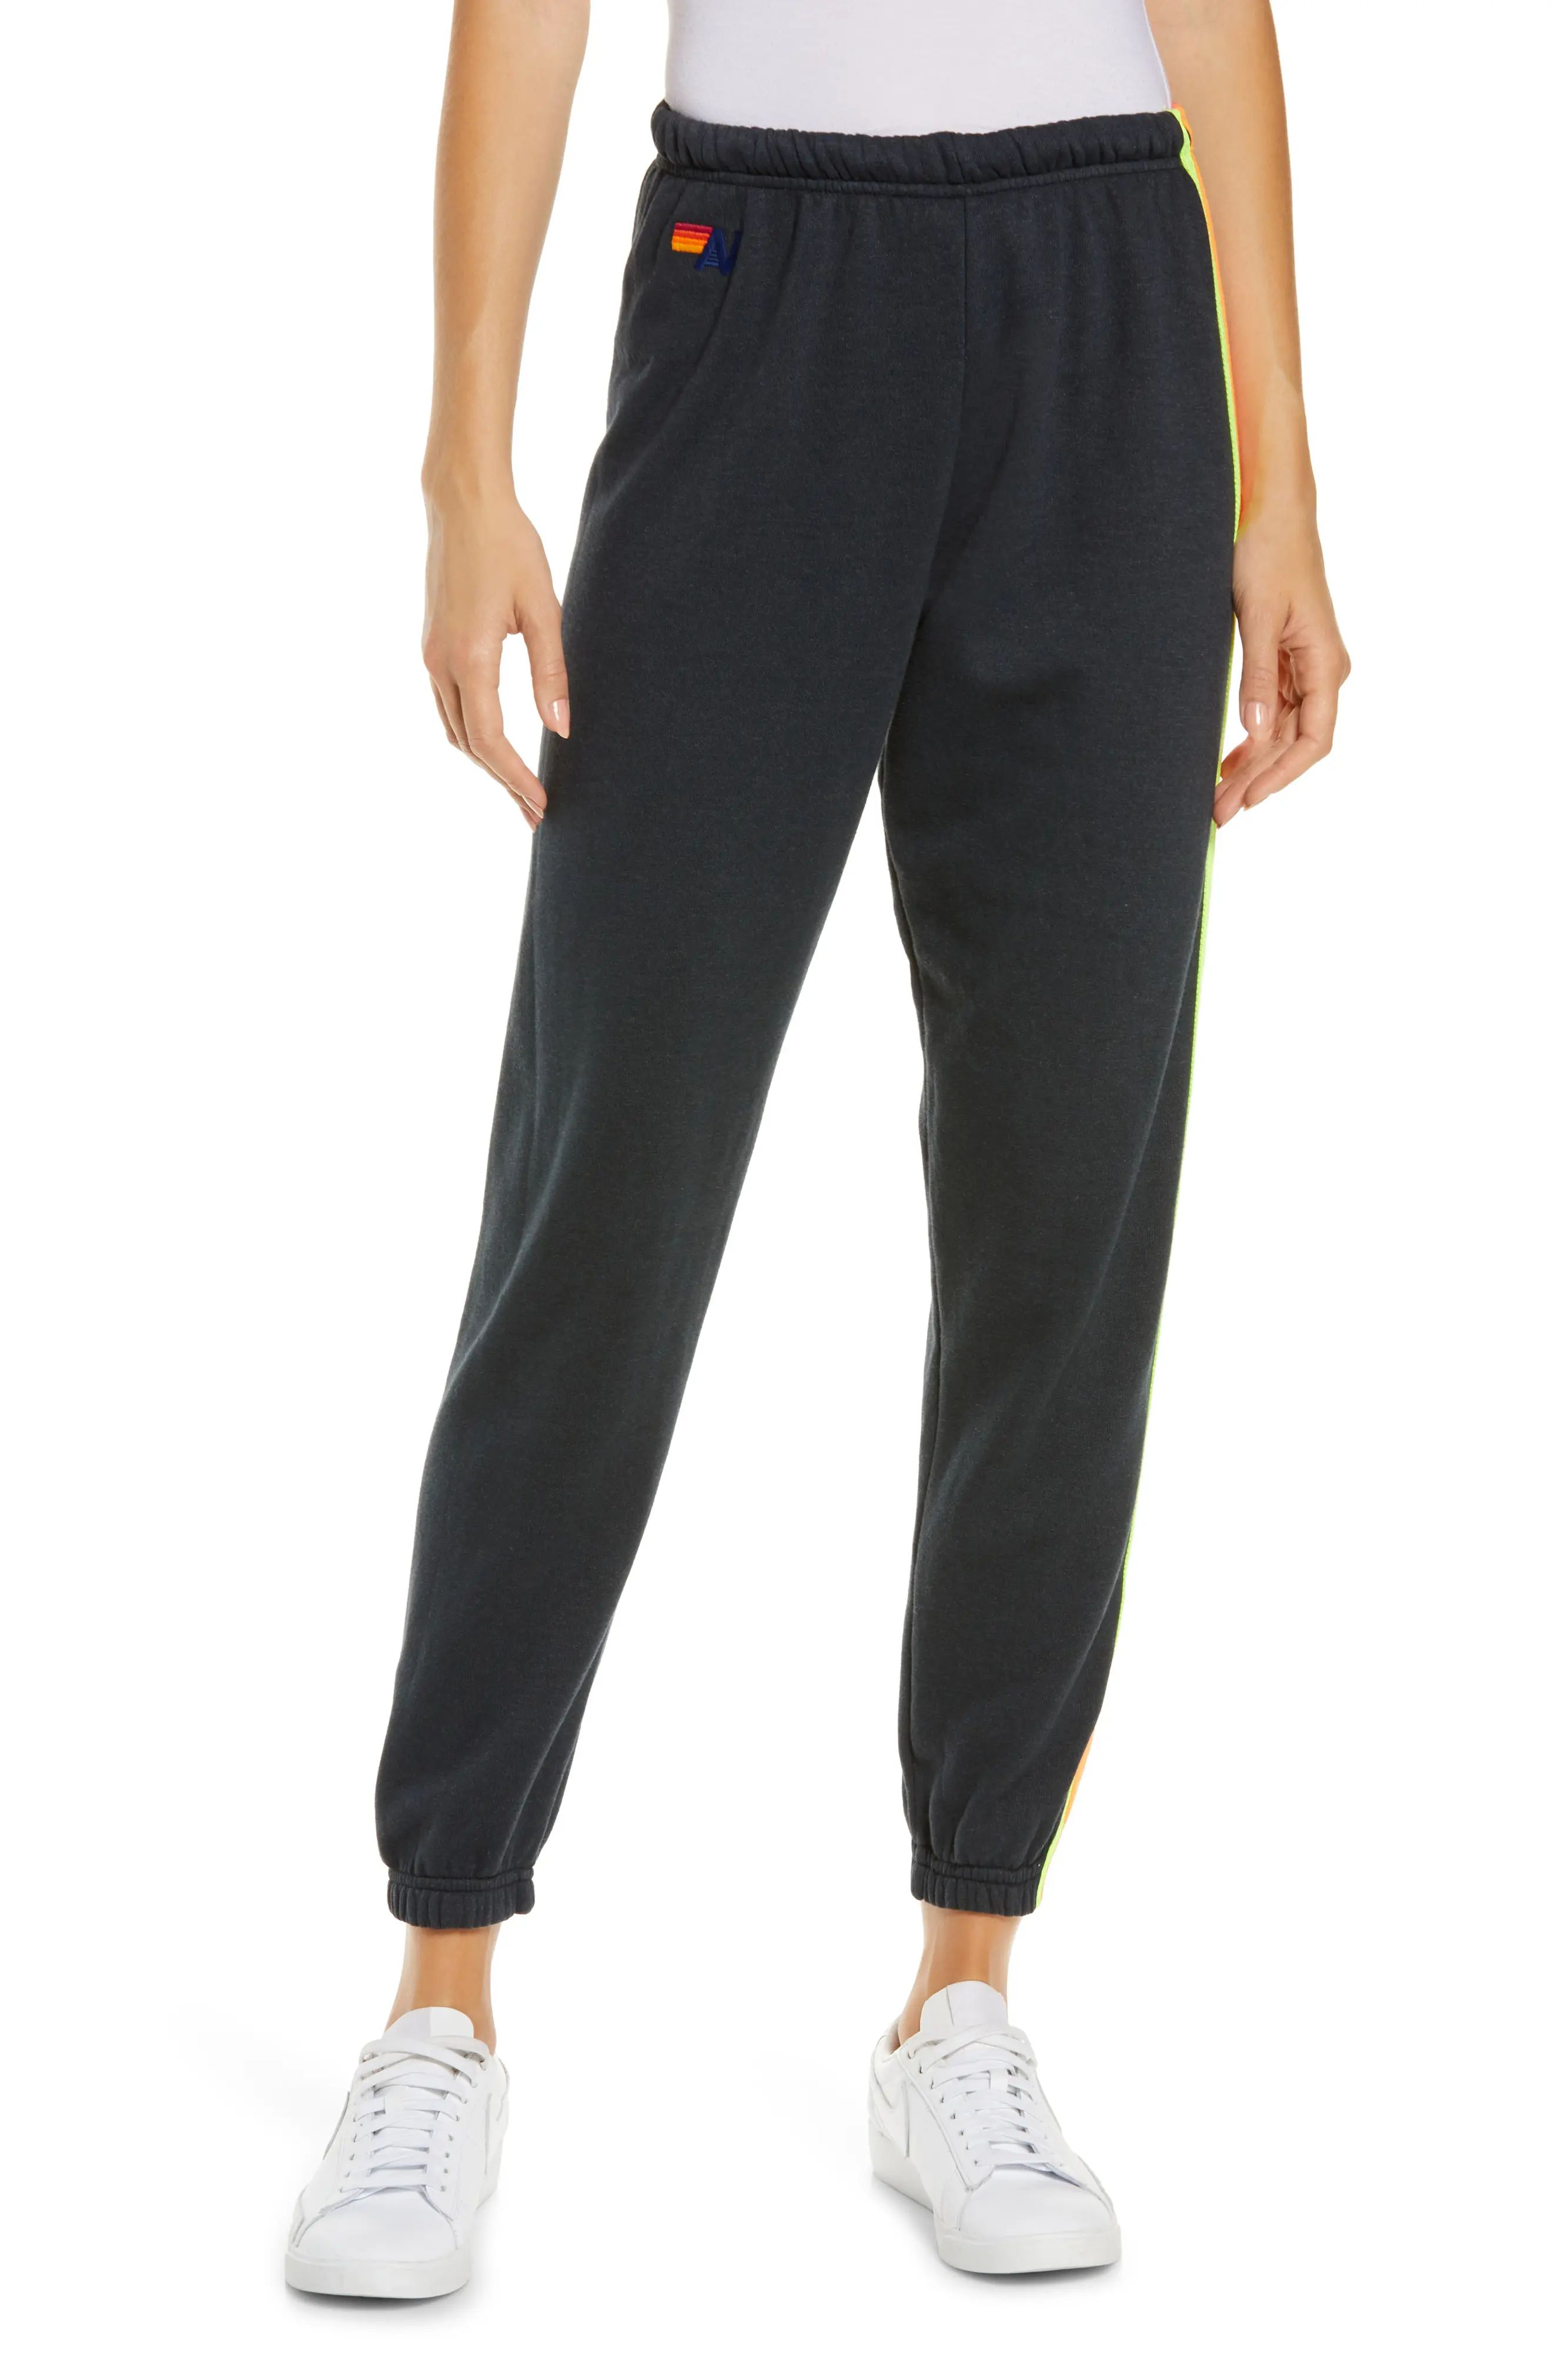 Aviator Nation Stripe Sweatpants, Size Medium in Charcoal/Neon Rainbow Blue at Nordstrom | Nordstrom